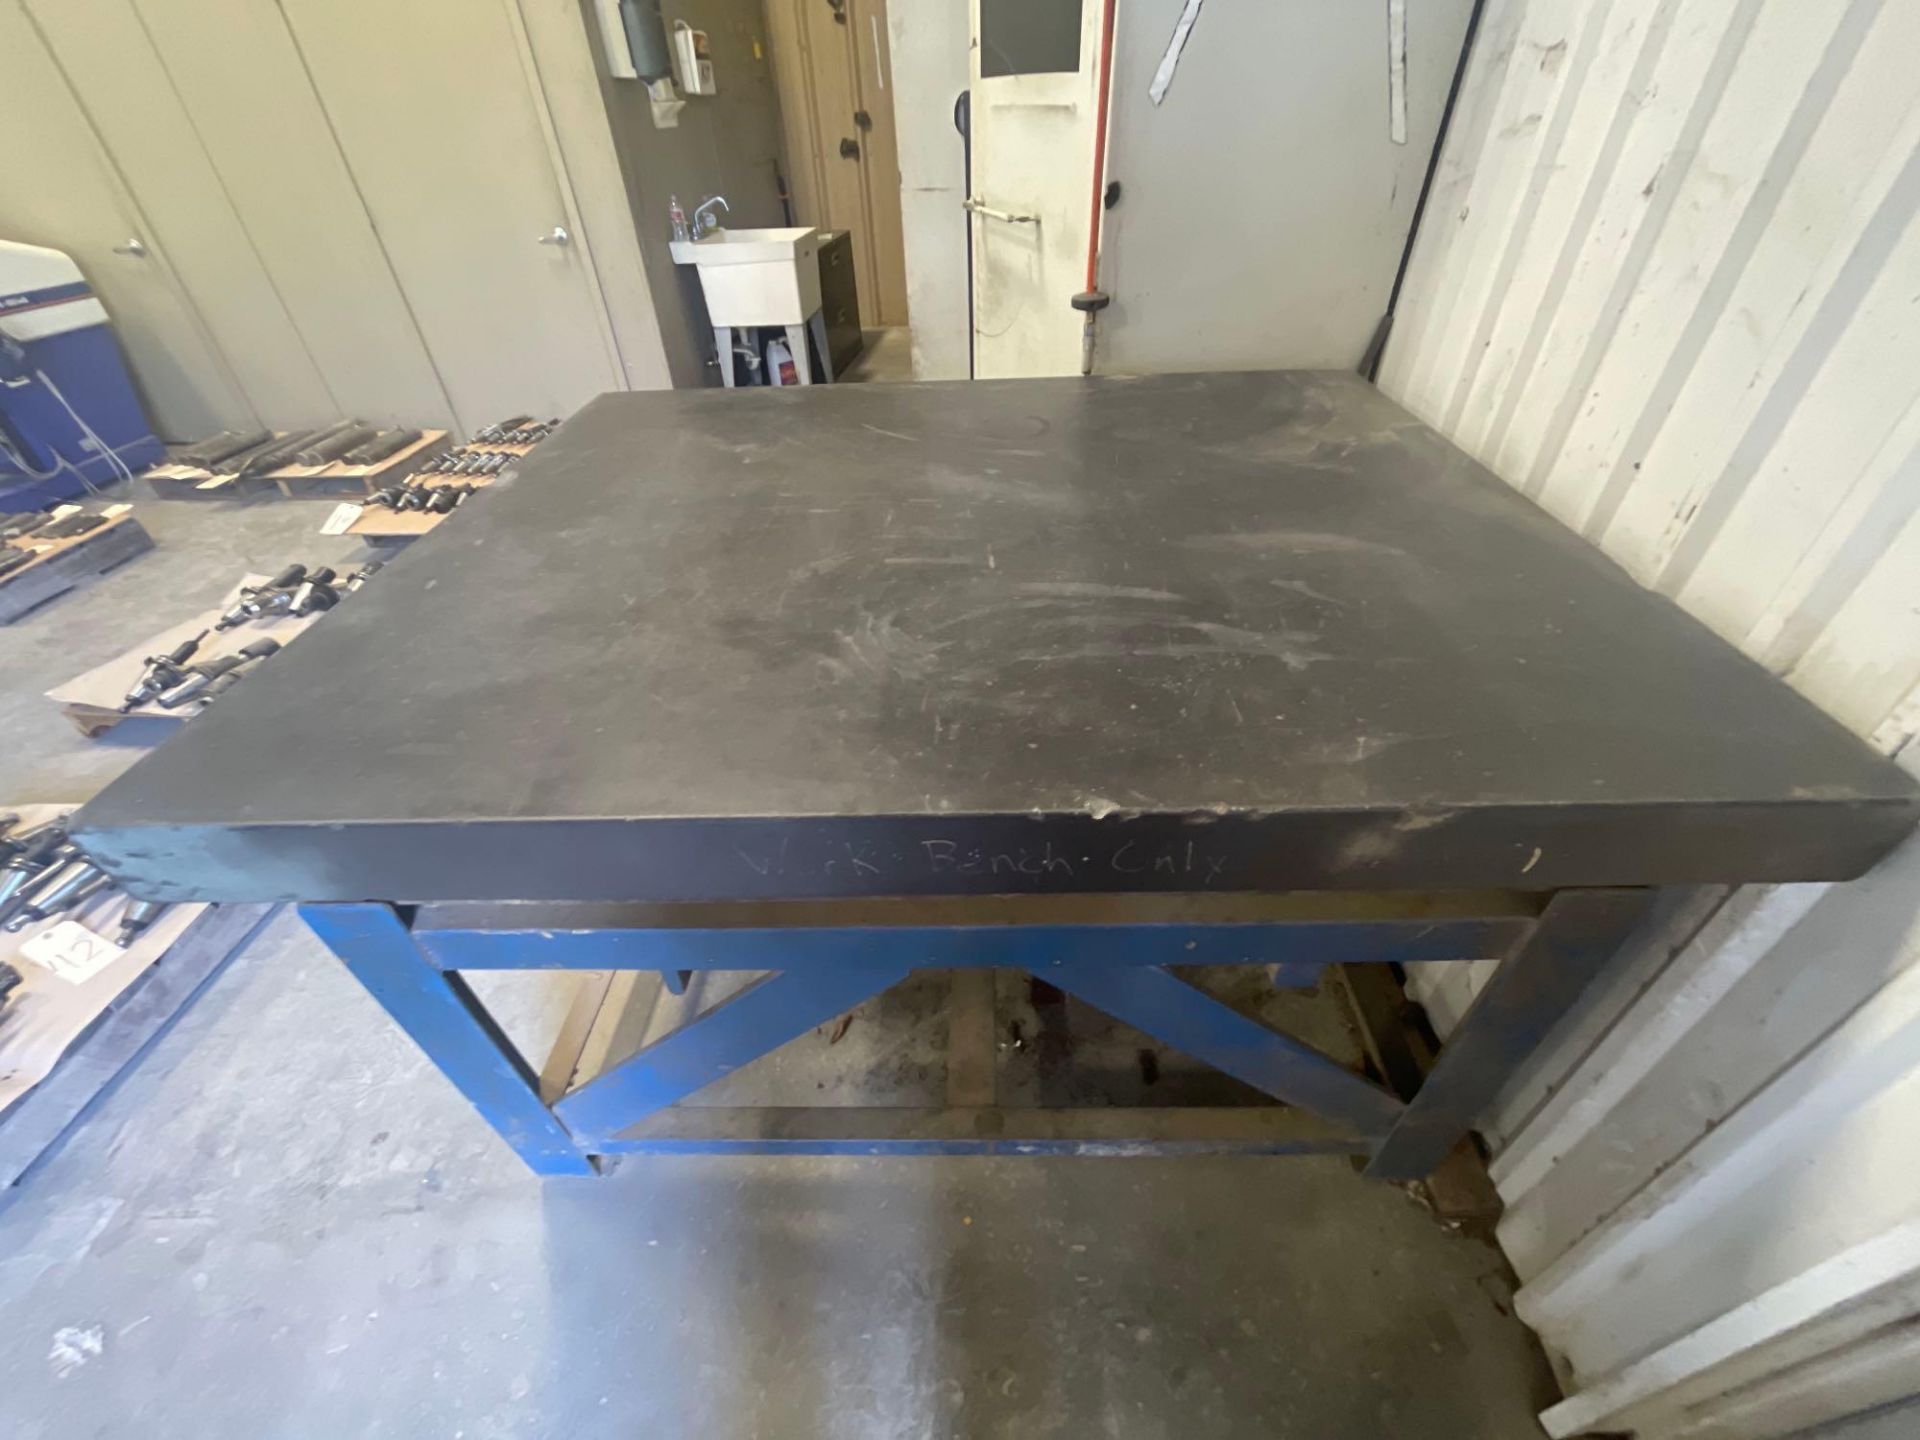 60” X 48” X 4” Granite Table on Heavy Duty Metal Base Overall Height 35” - Image 6 of 6